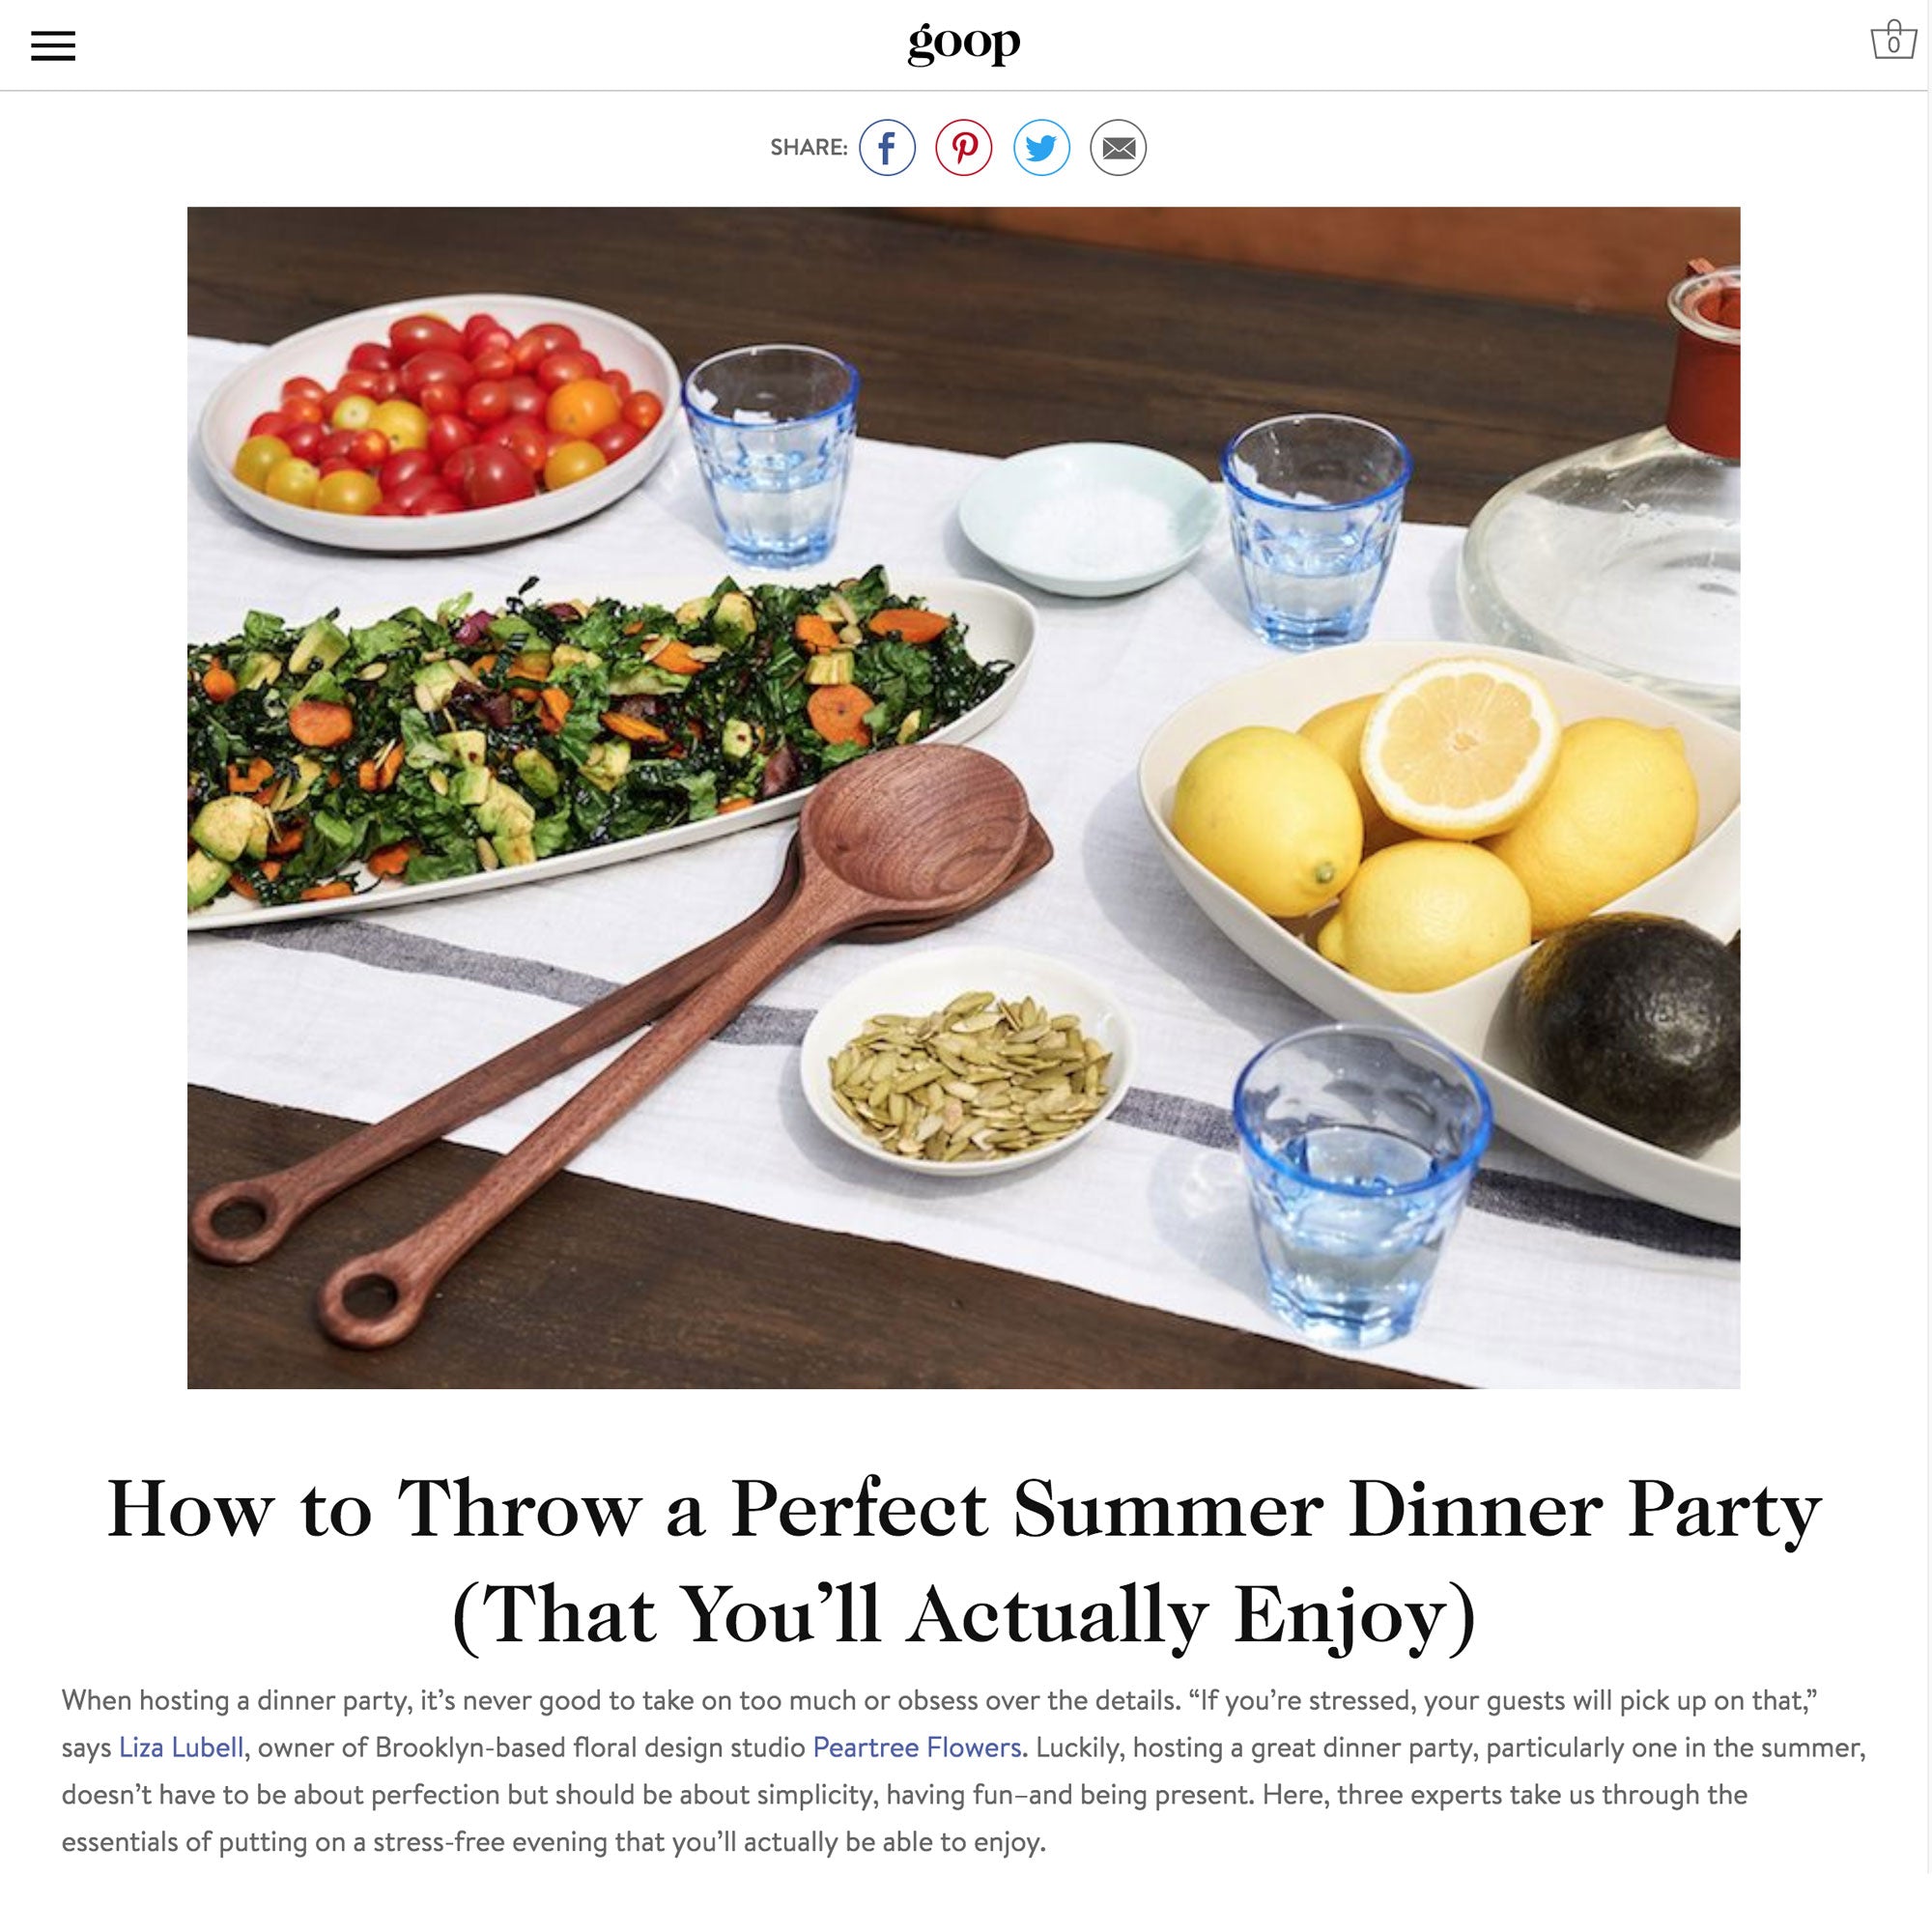 How to Throw a Perfect Summer Dinner Party (That You’ll Actually Enjoy)